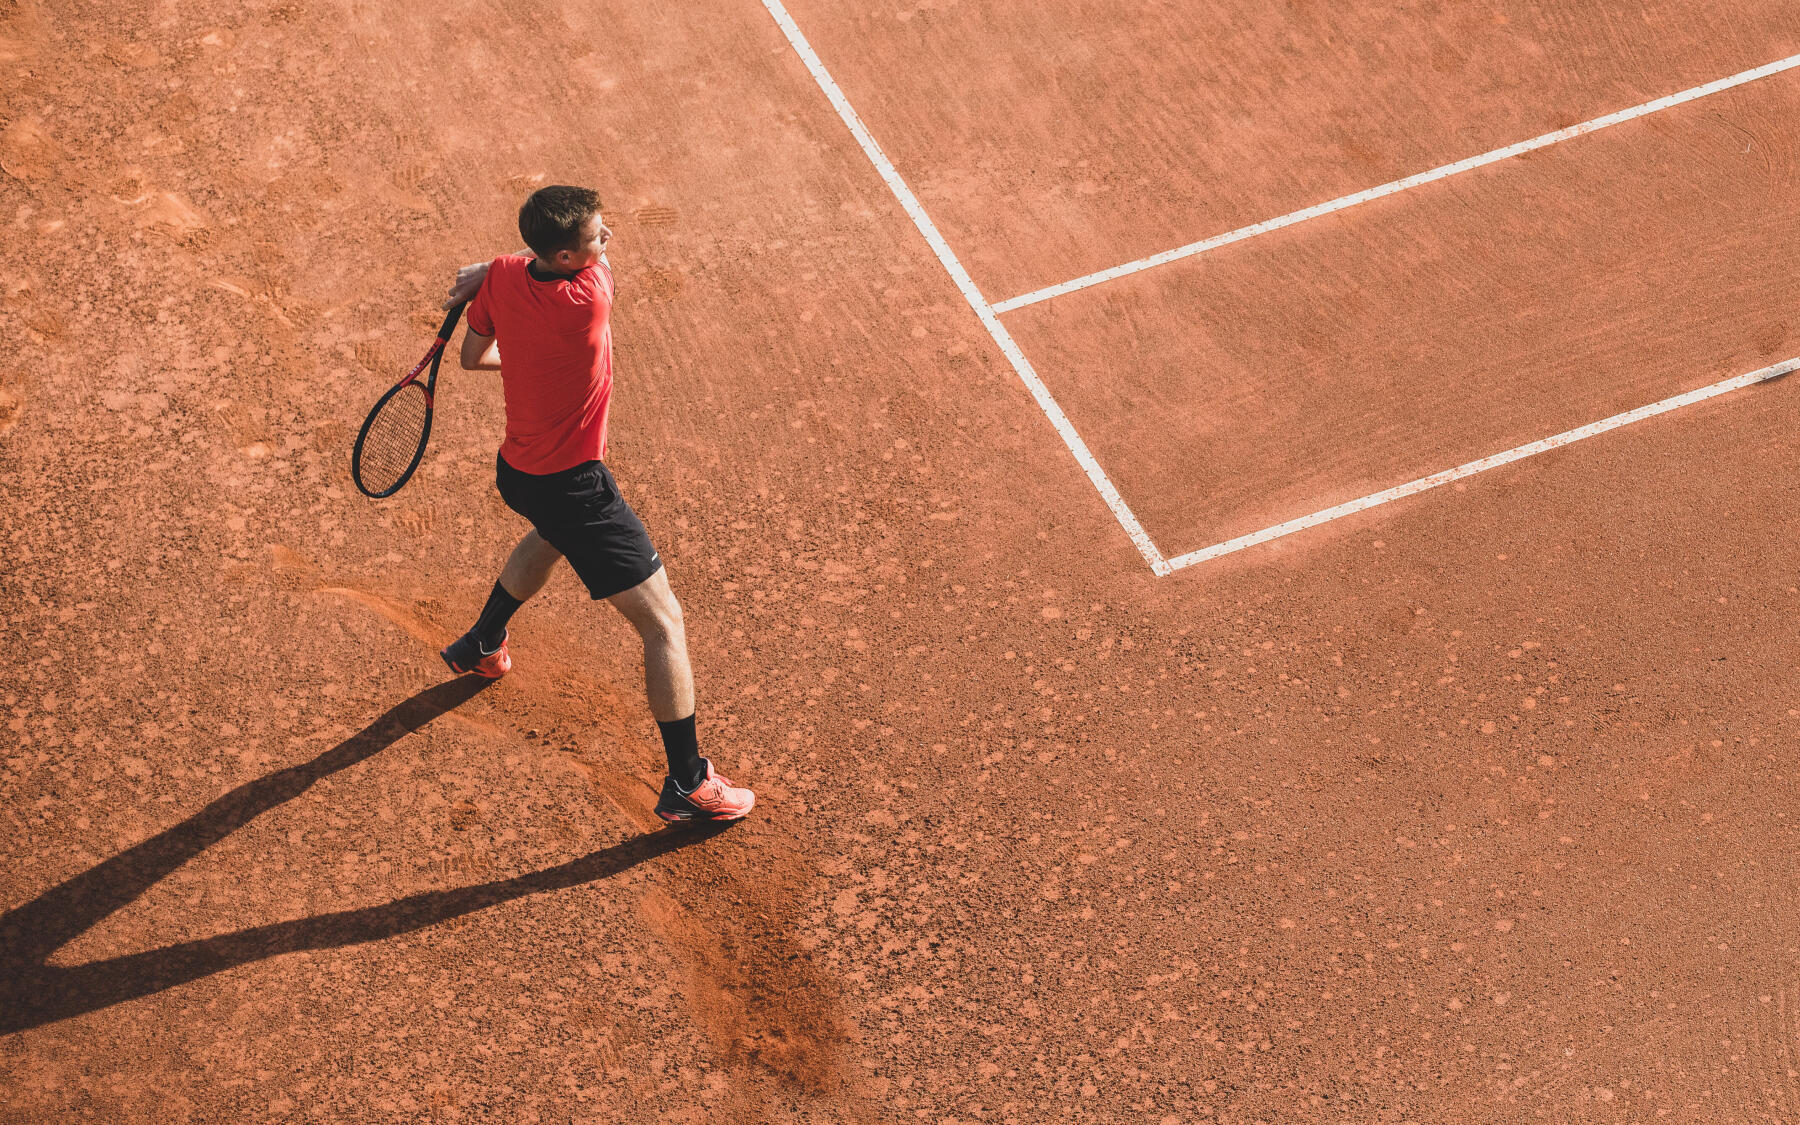 Tennis Exercises: 2 exercises for playing well on clay